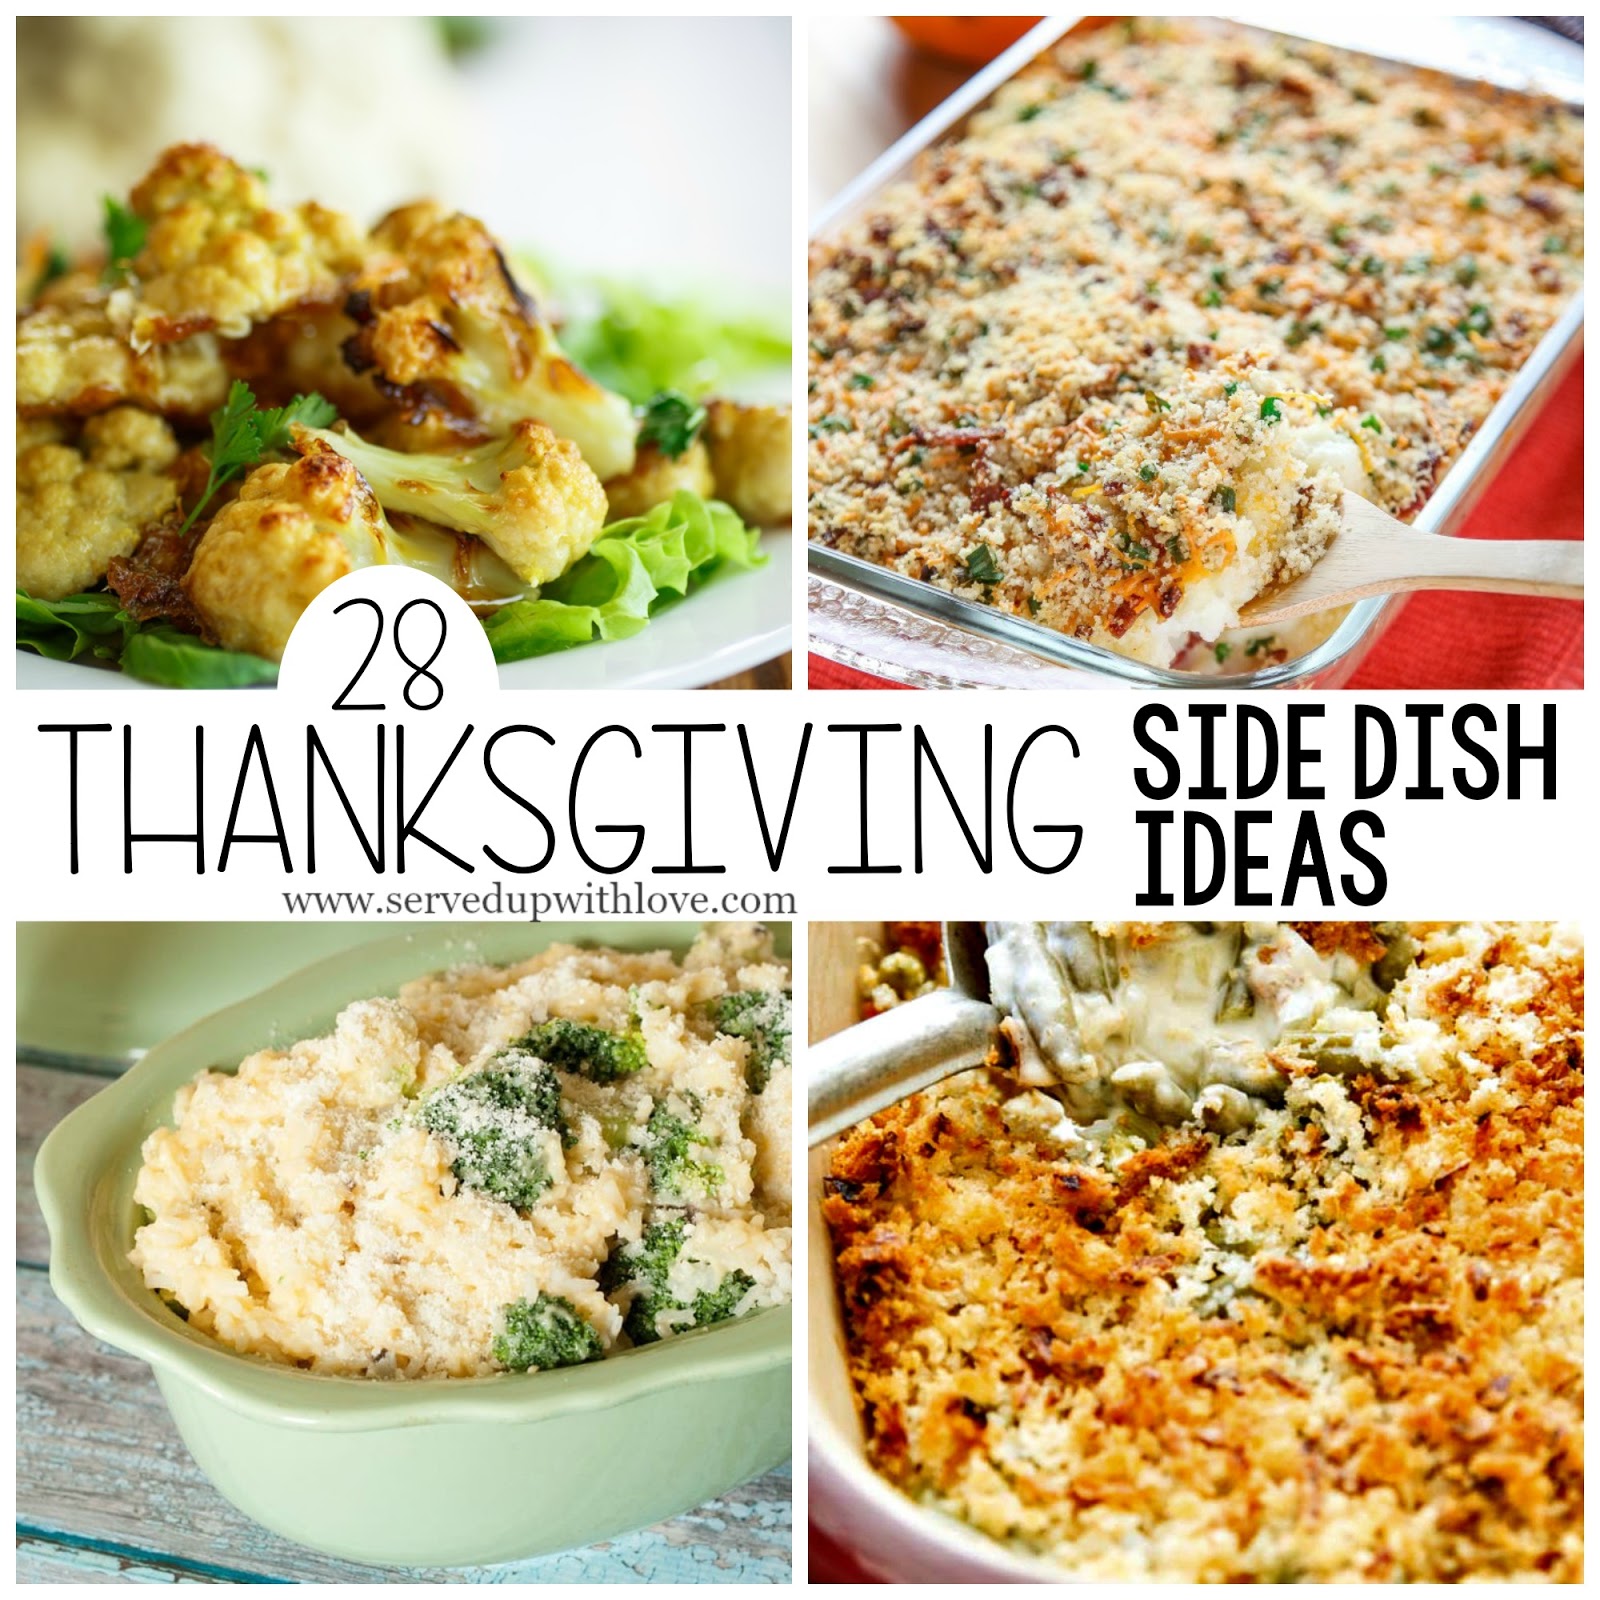 Served Up With Love: 28 Thanksgiving Side Dish Ideas